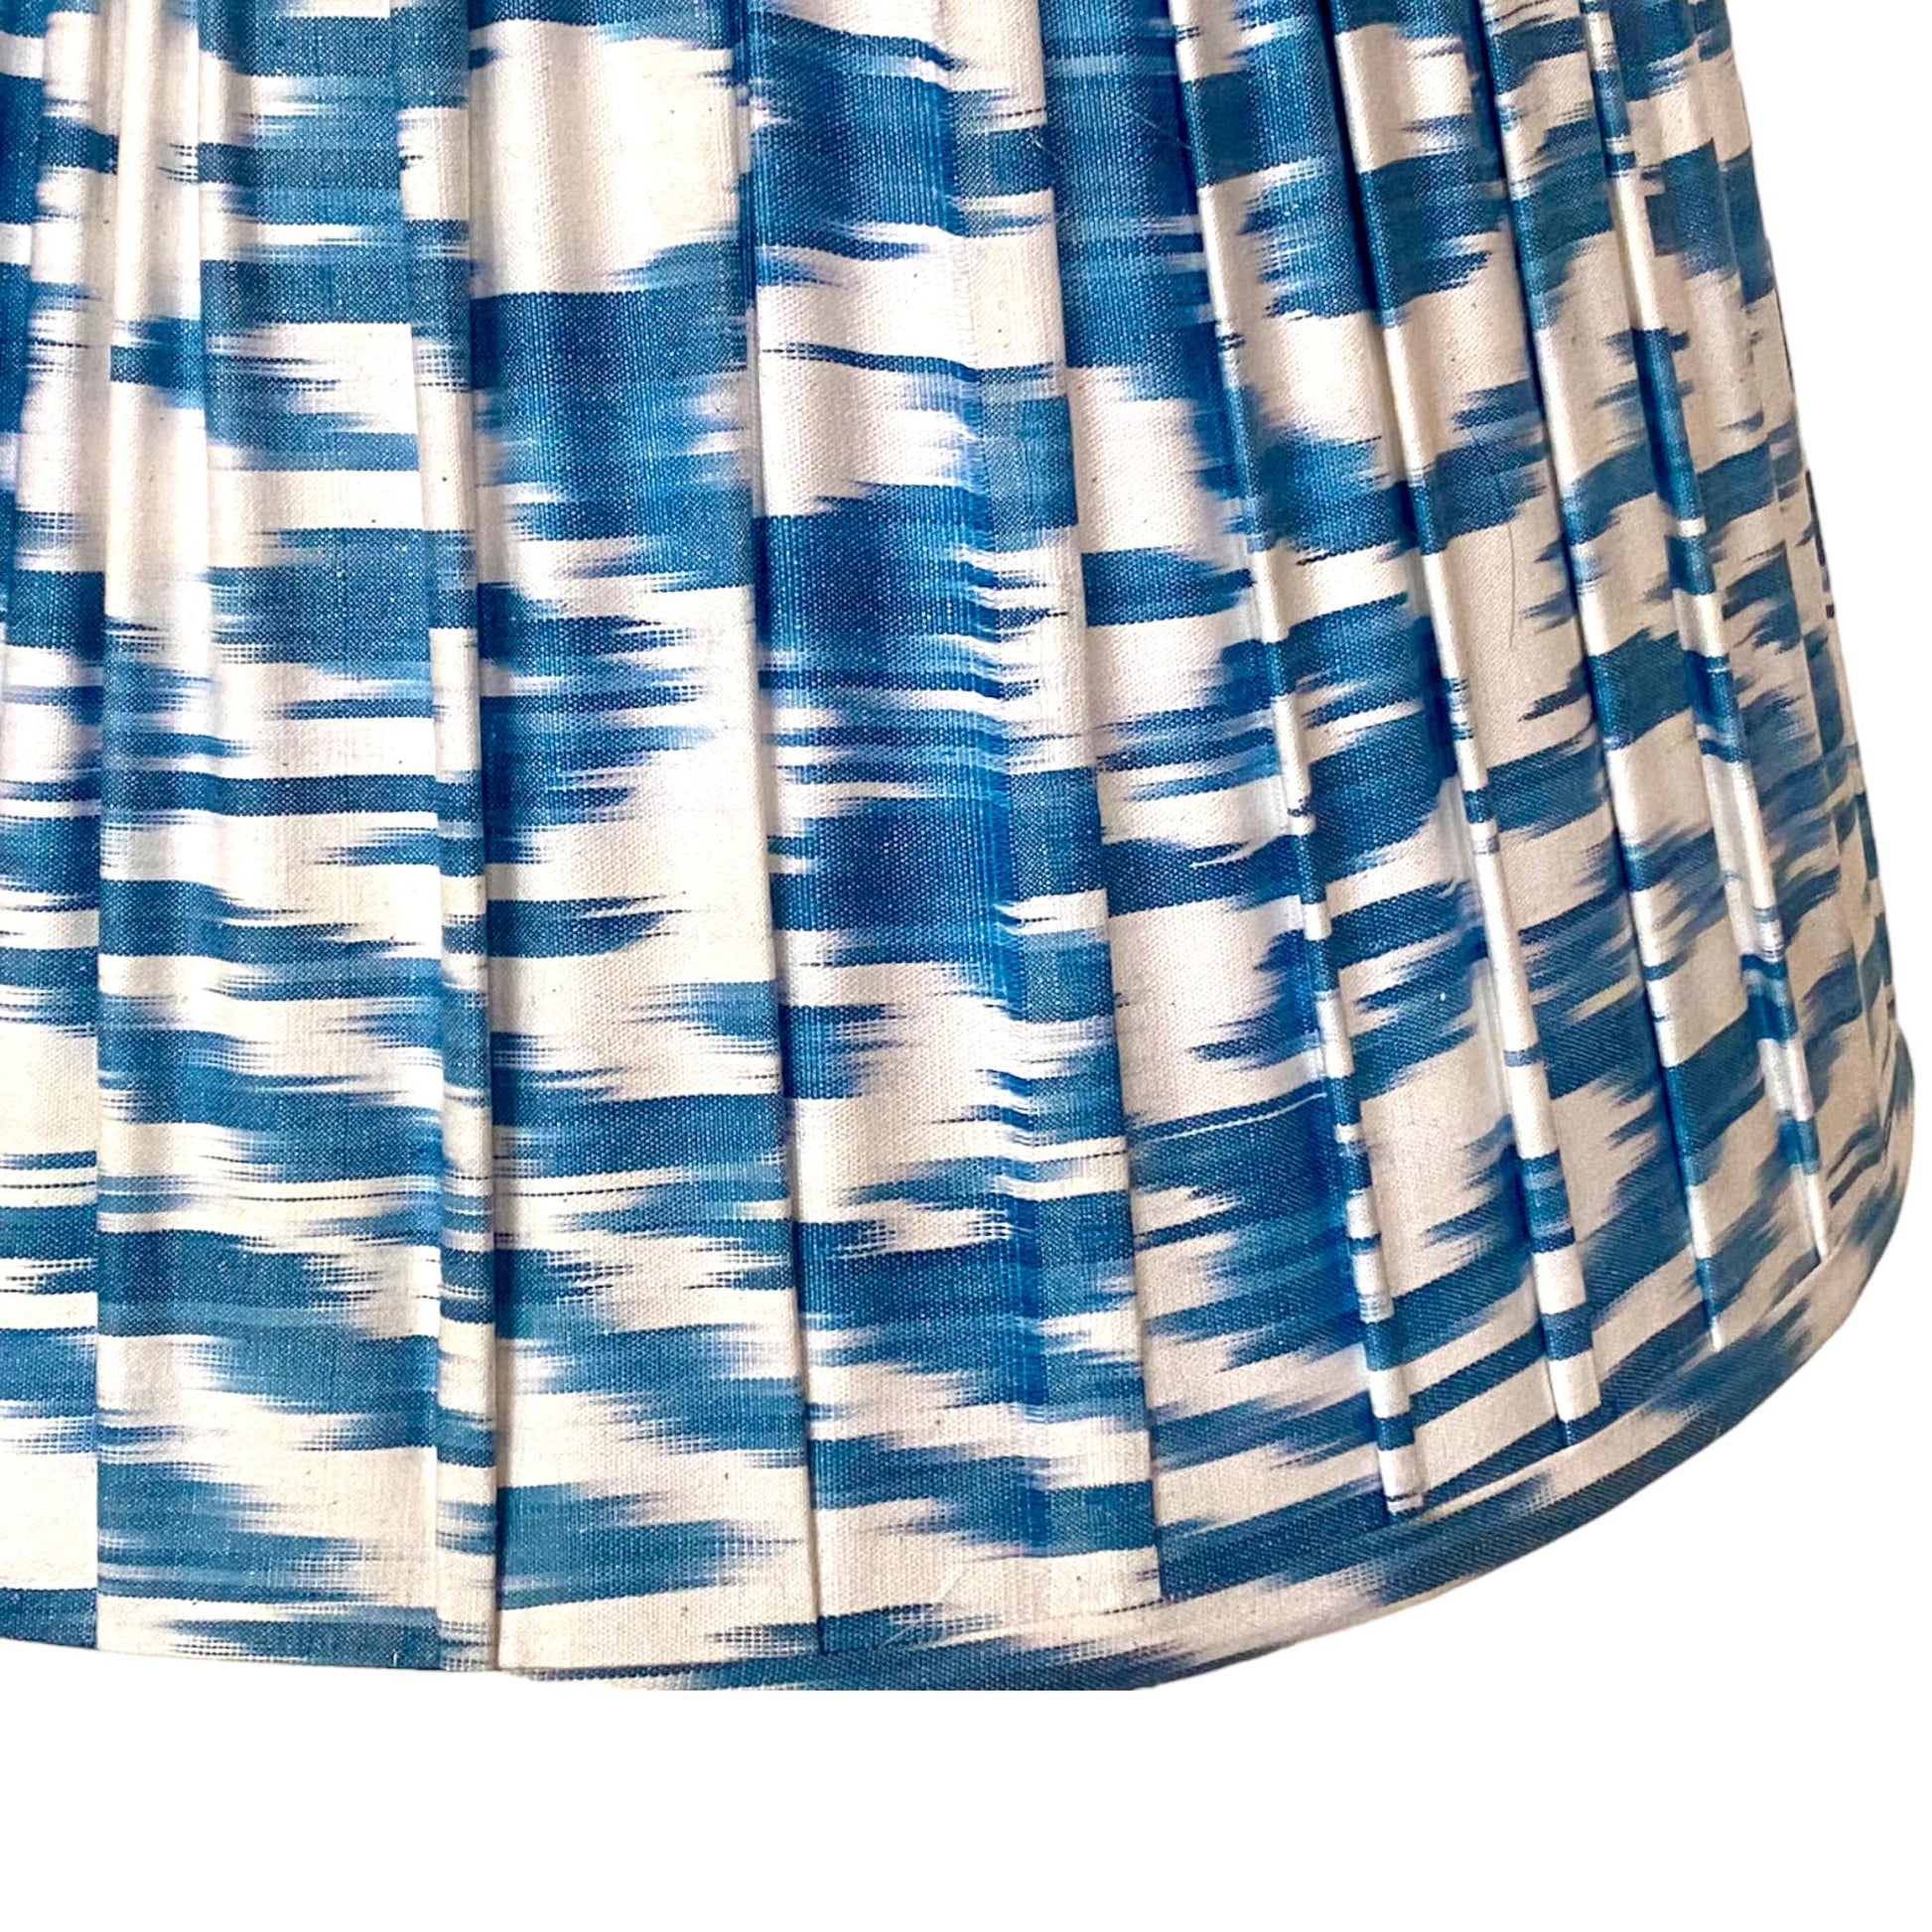 Blue and white ikat silk lampshade close up